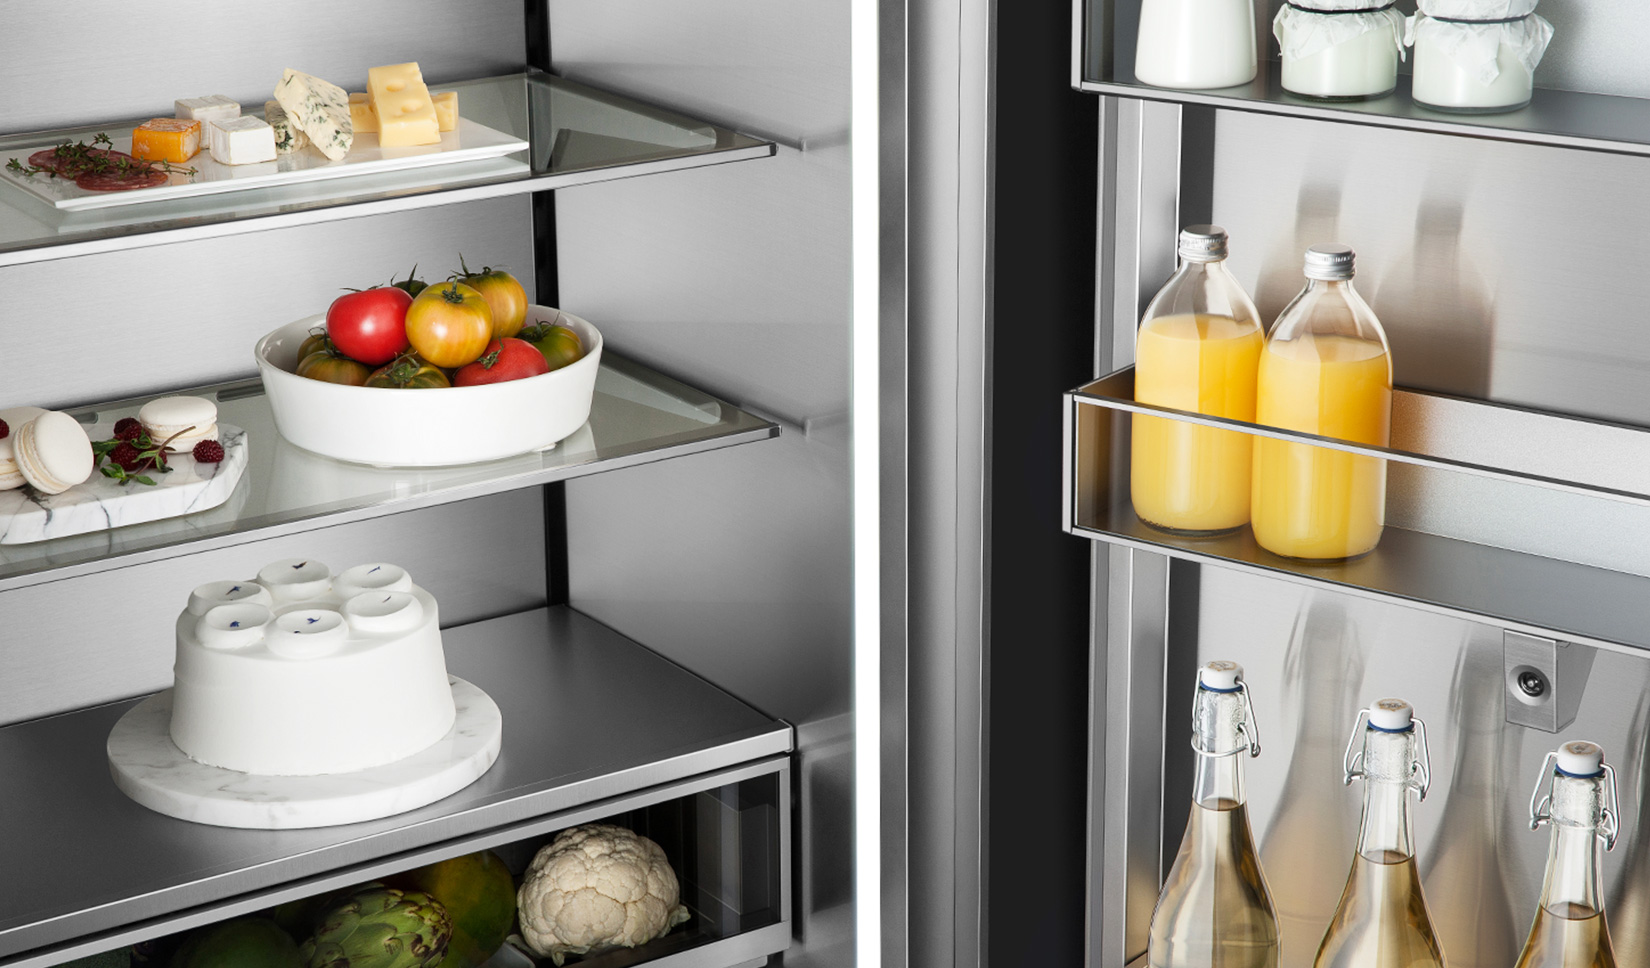 This is an image that shows the internal design of the built-in refrigerator BRR9000M.